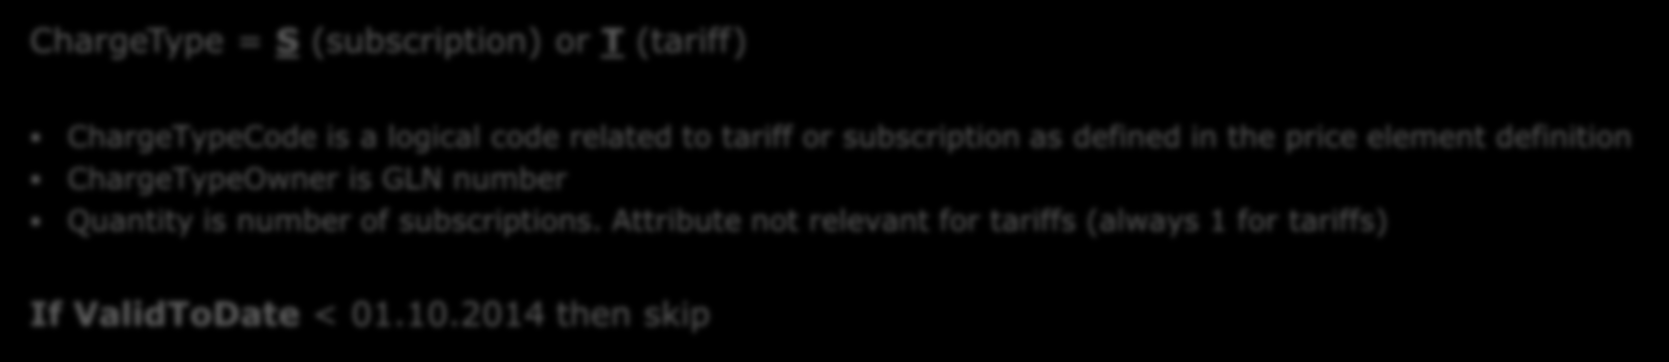 File format 1 Tariff and subscription links (Full list) Pre-requisite Price definitions is created using GUI or B2B Price elements must have been defined before linking of tariffs and subscriptions